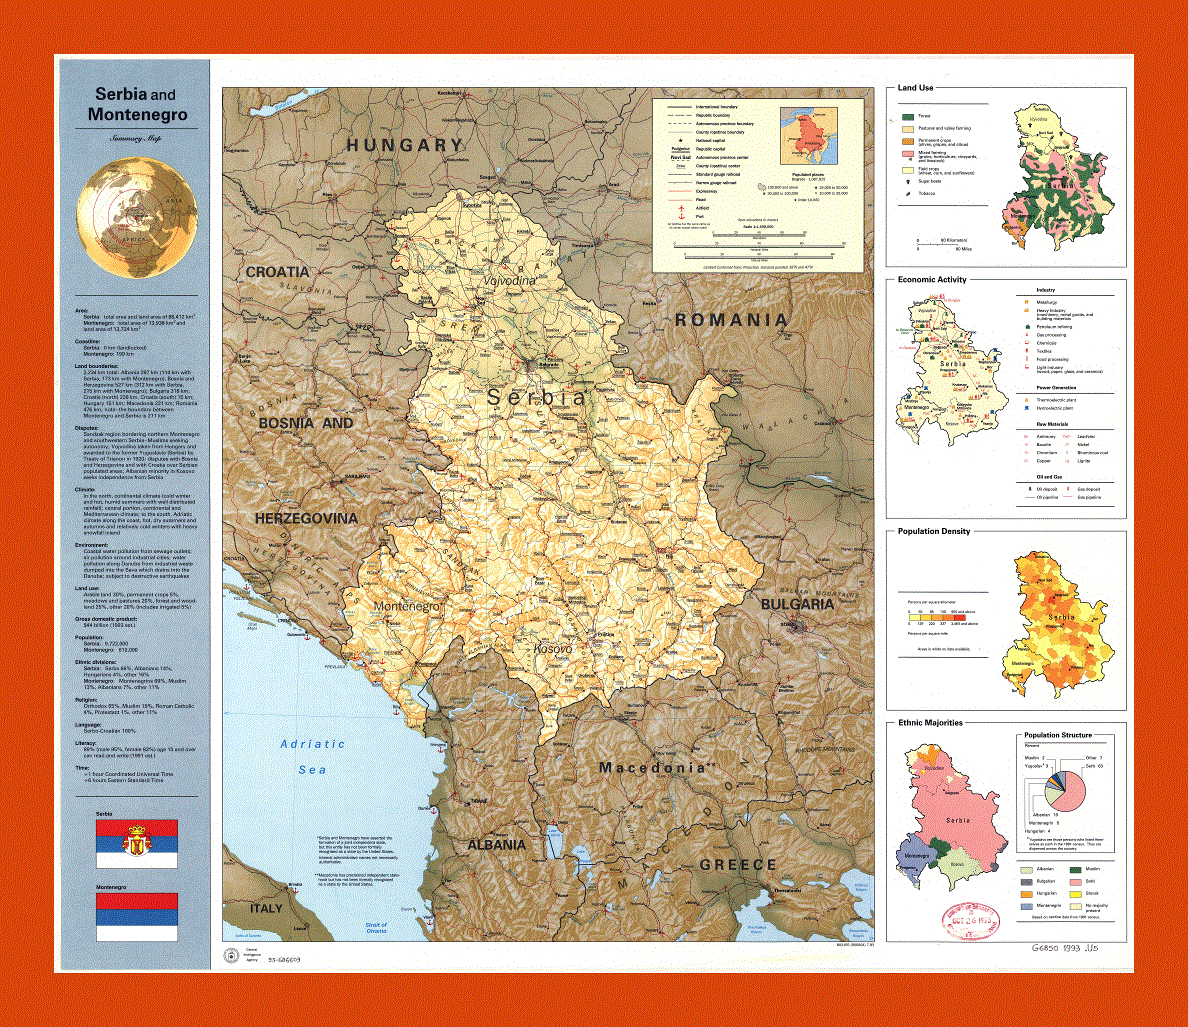 Summary map of Serbia and Montenegro - 1993